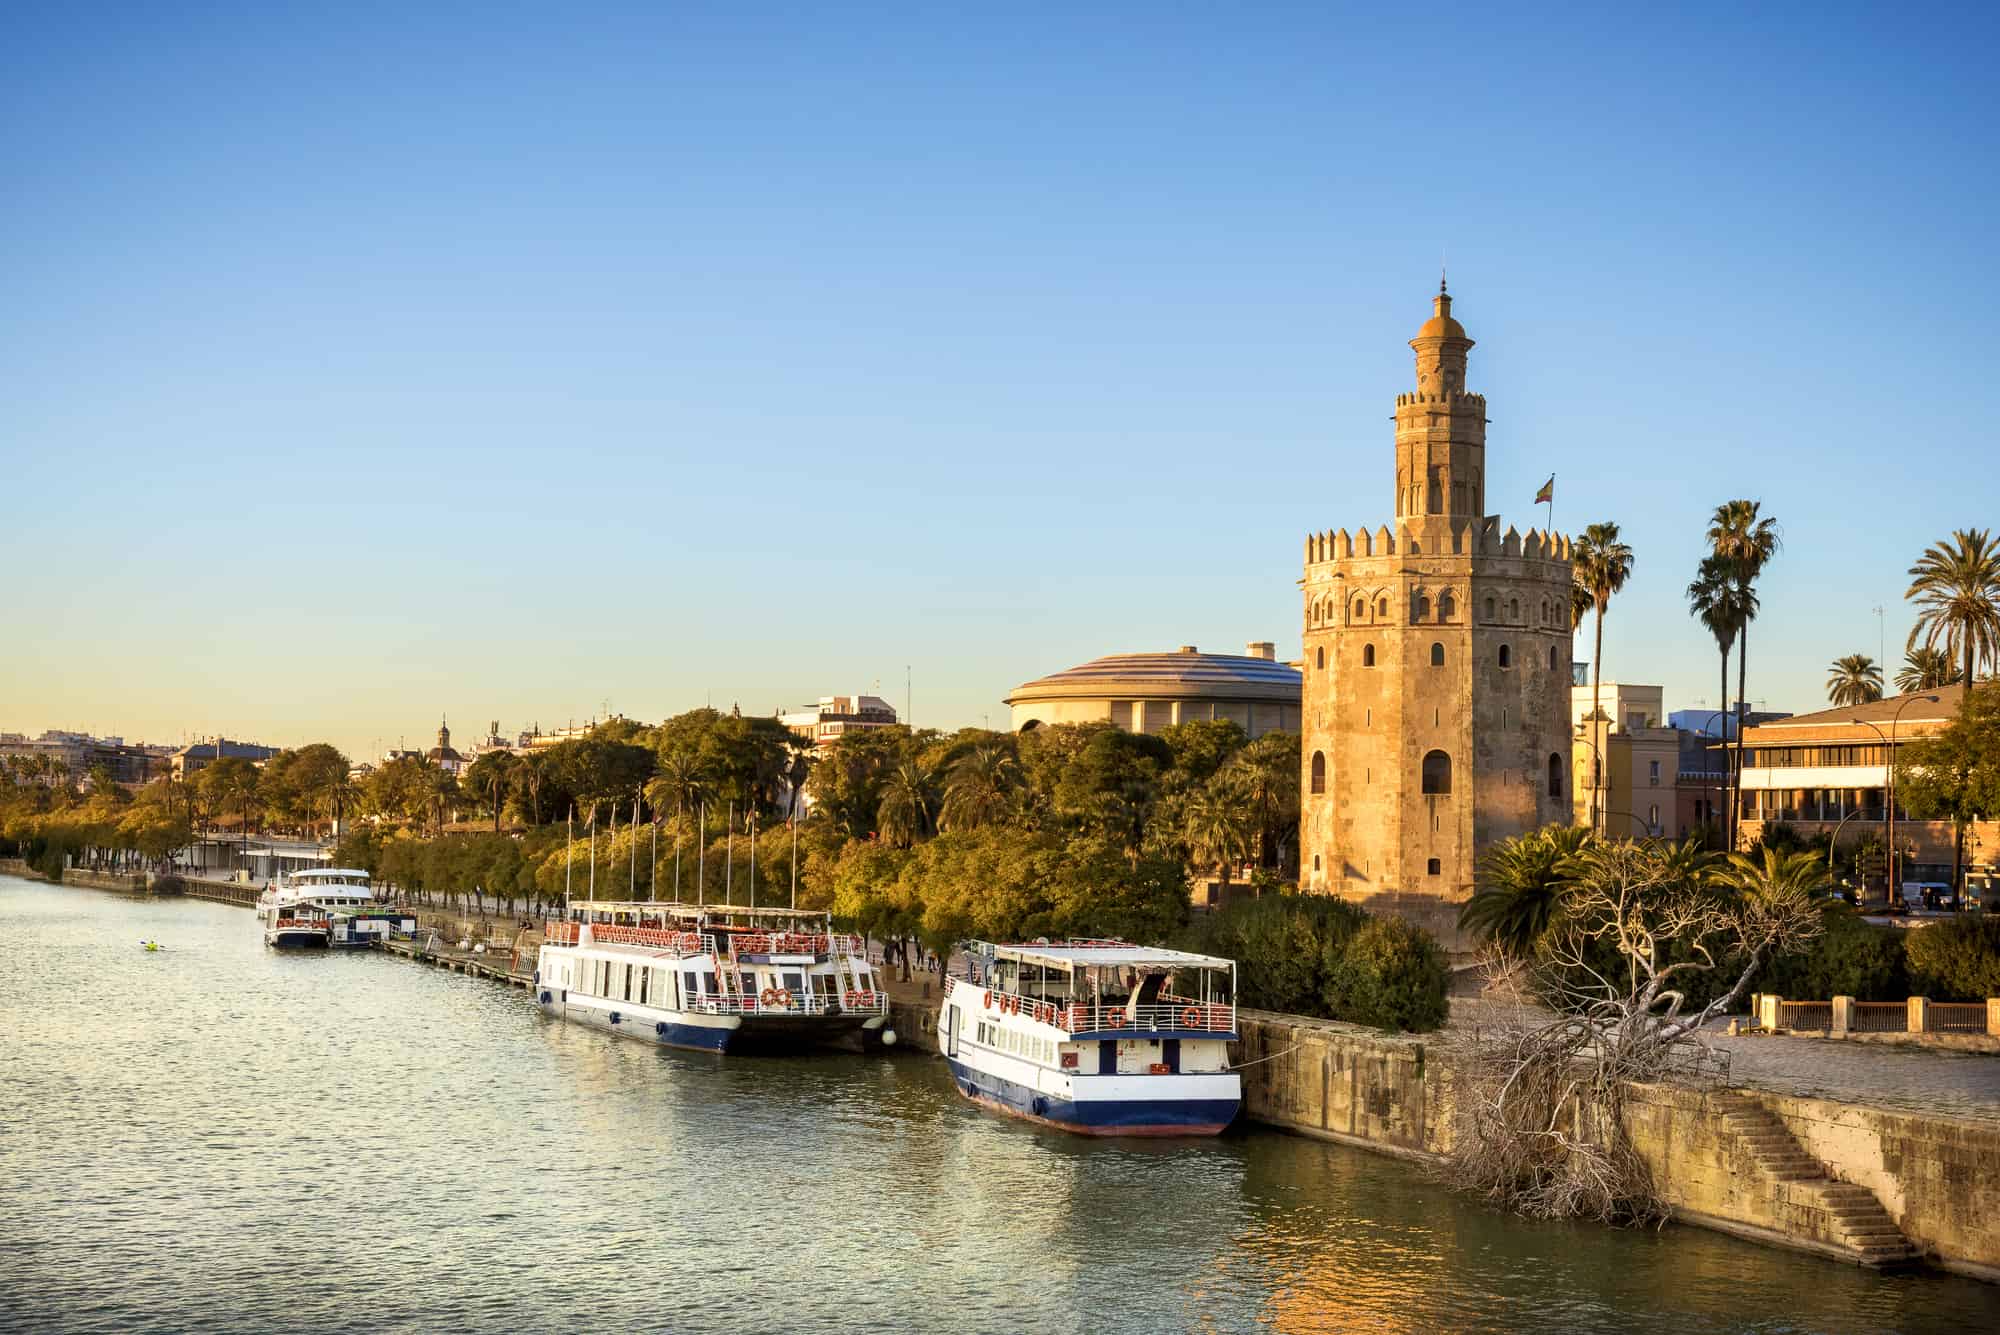 View of Golden Tower (Torre del Oro) of Seville, Andalusia, Spain